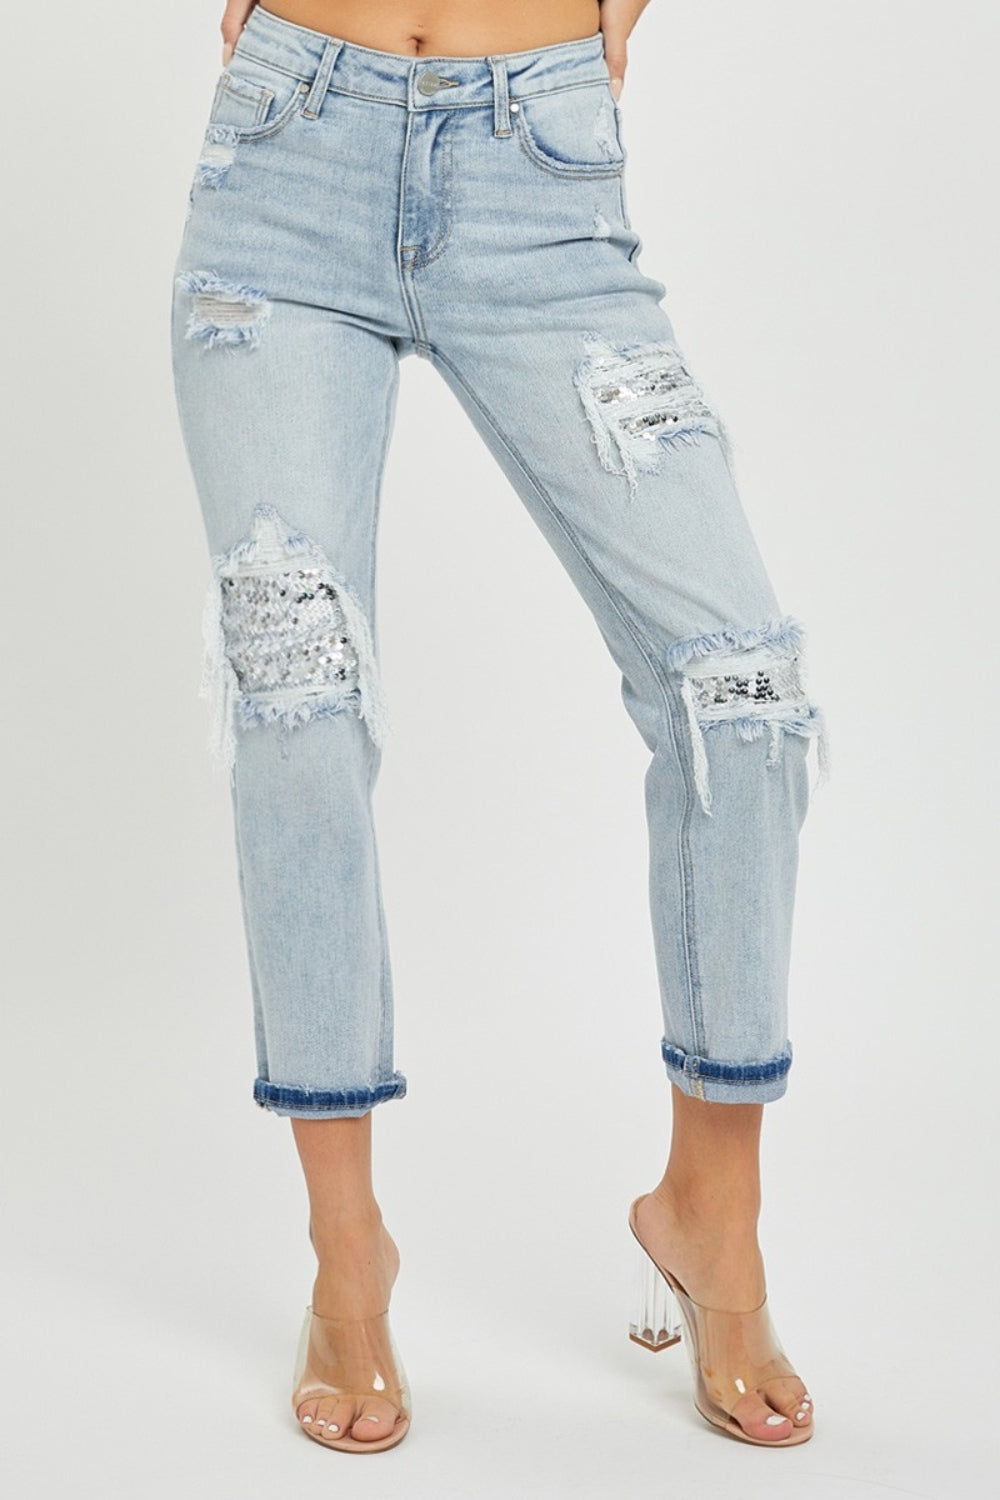 RISEN Mid-Rise Sequin Patched Jeans - Tigbul's Variety Fashion Shop